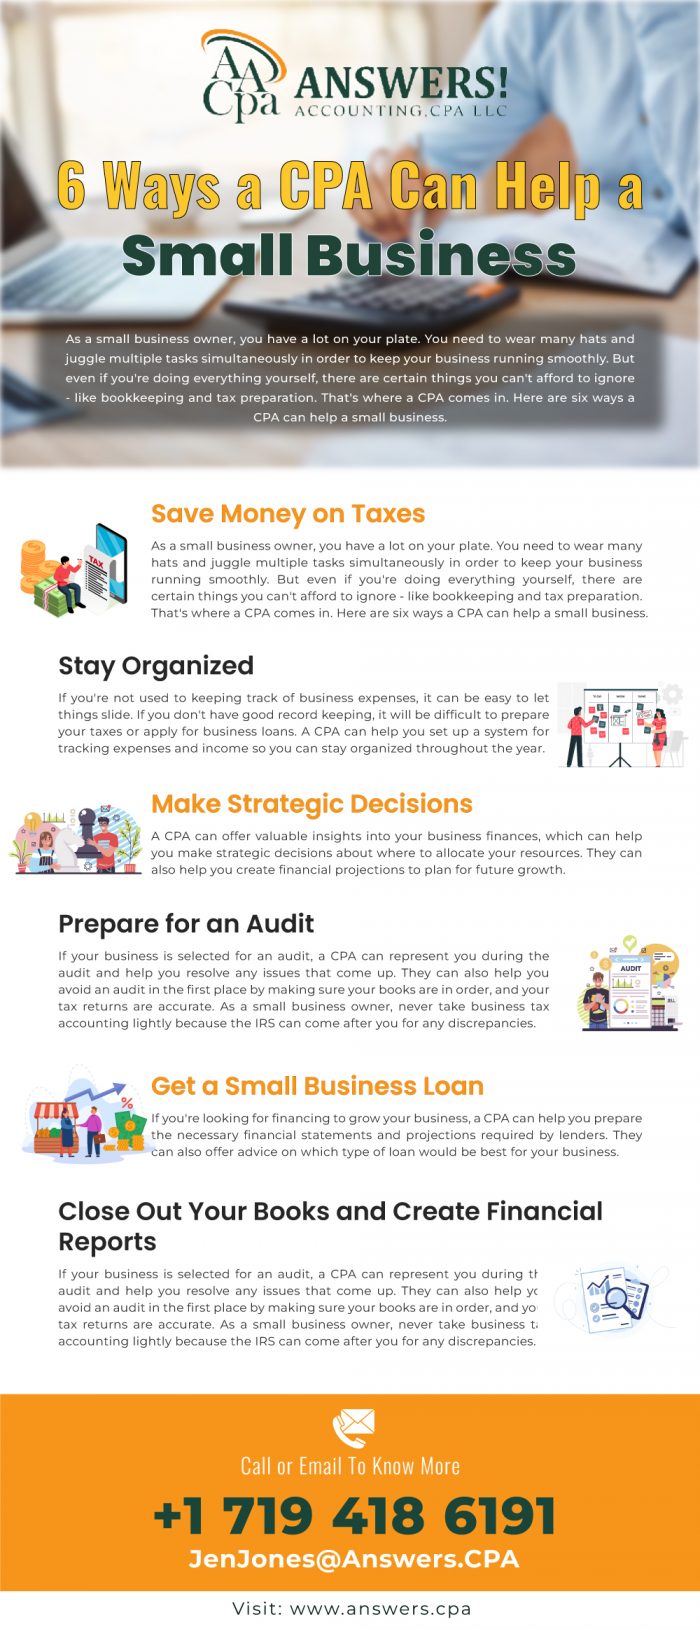 Top 6 ways that a CPA can Help a Small Business